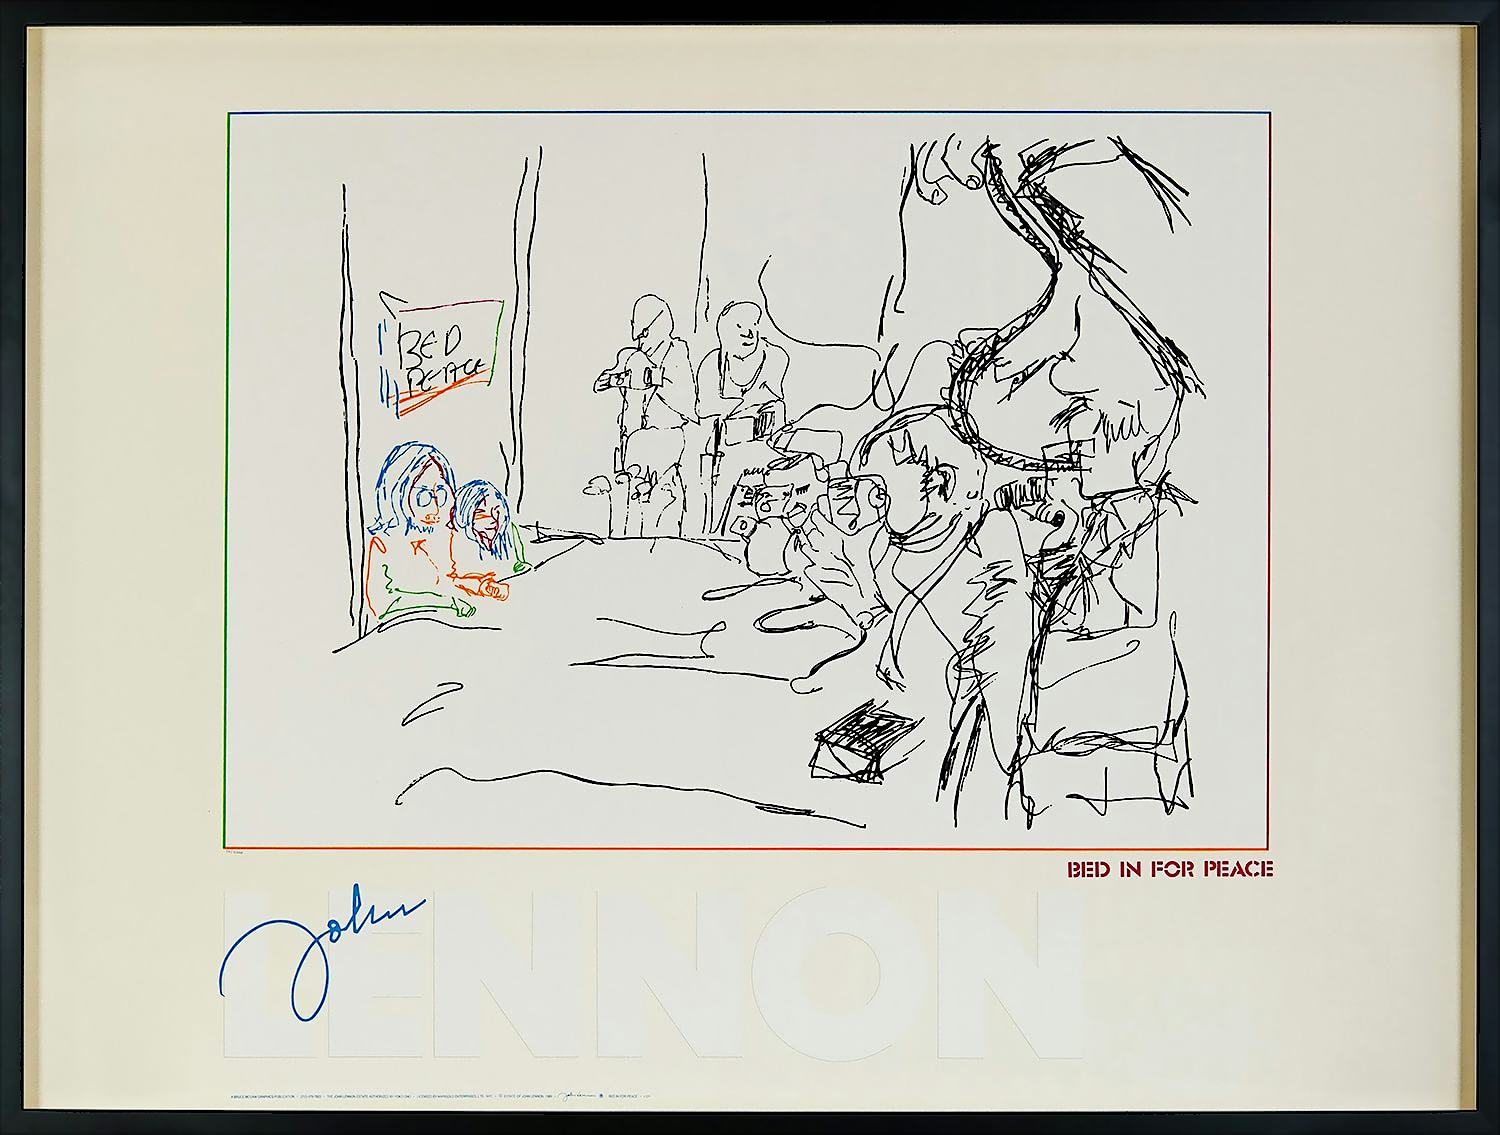 Bed In For Peace, 1989 by John Lennon